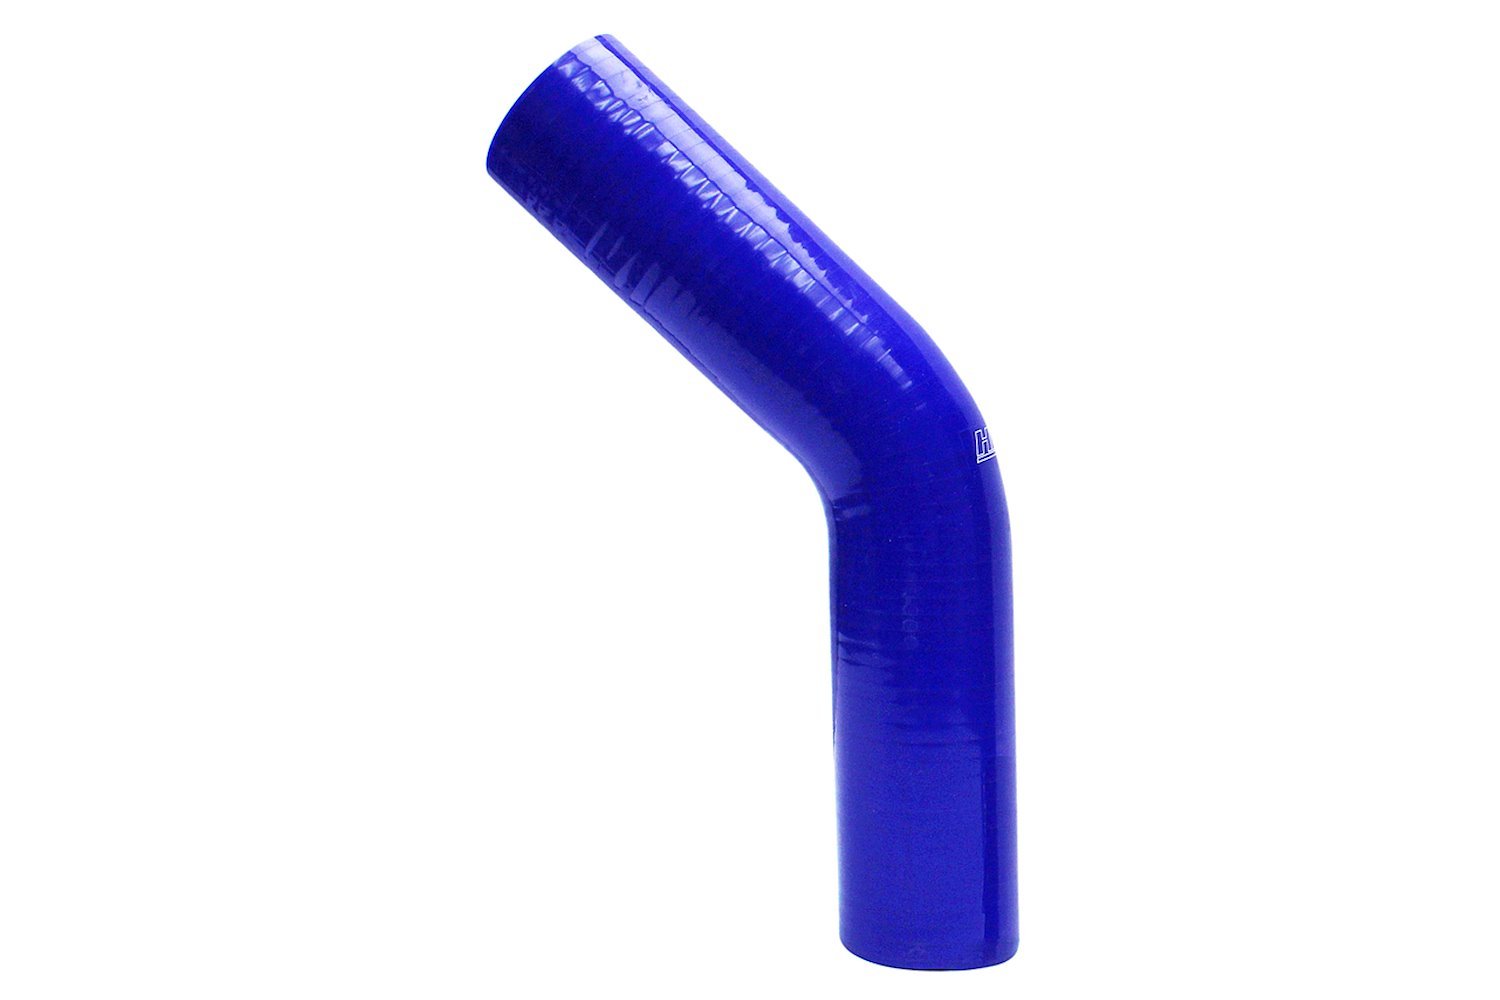 HTSEC45-212-BLUE Silicone 45-Degree Elbow Coupler Hose, High-Temp 4-Ply Reinforced, 2-1/8 in. ID, Blue